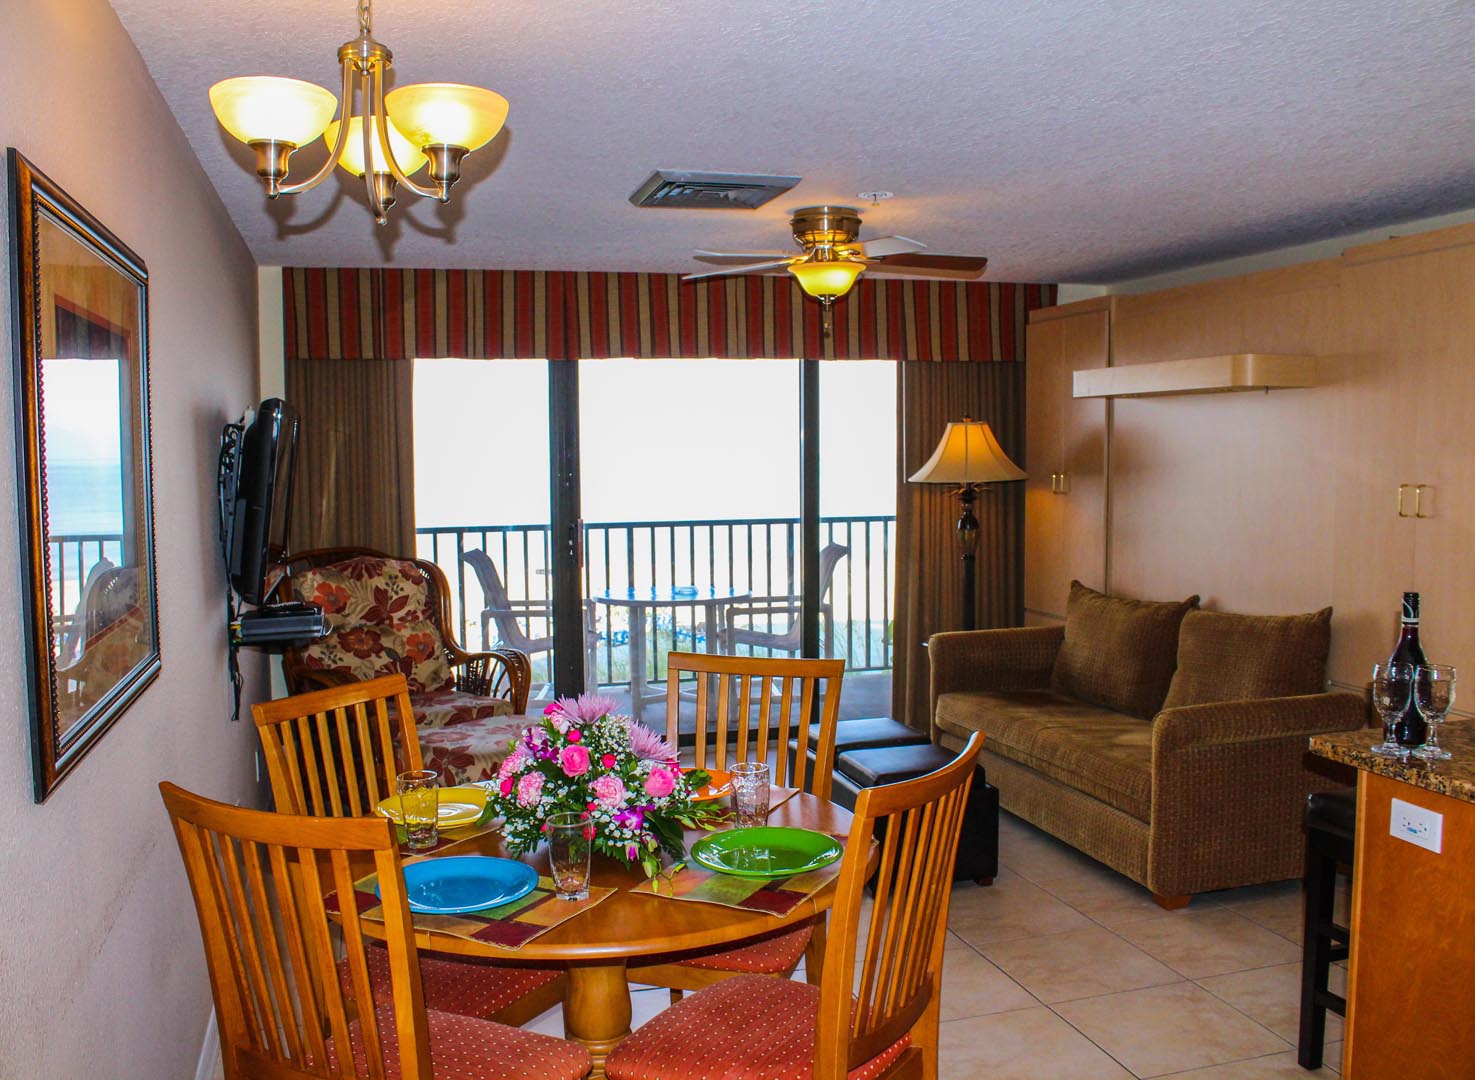 A cozy living and dining area at VRI's Island Gulf Resort in Madeira Beach, Florida.